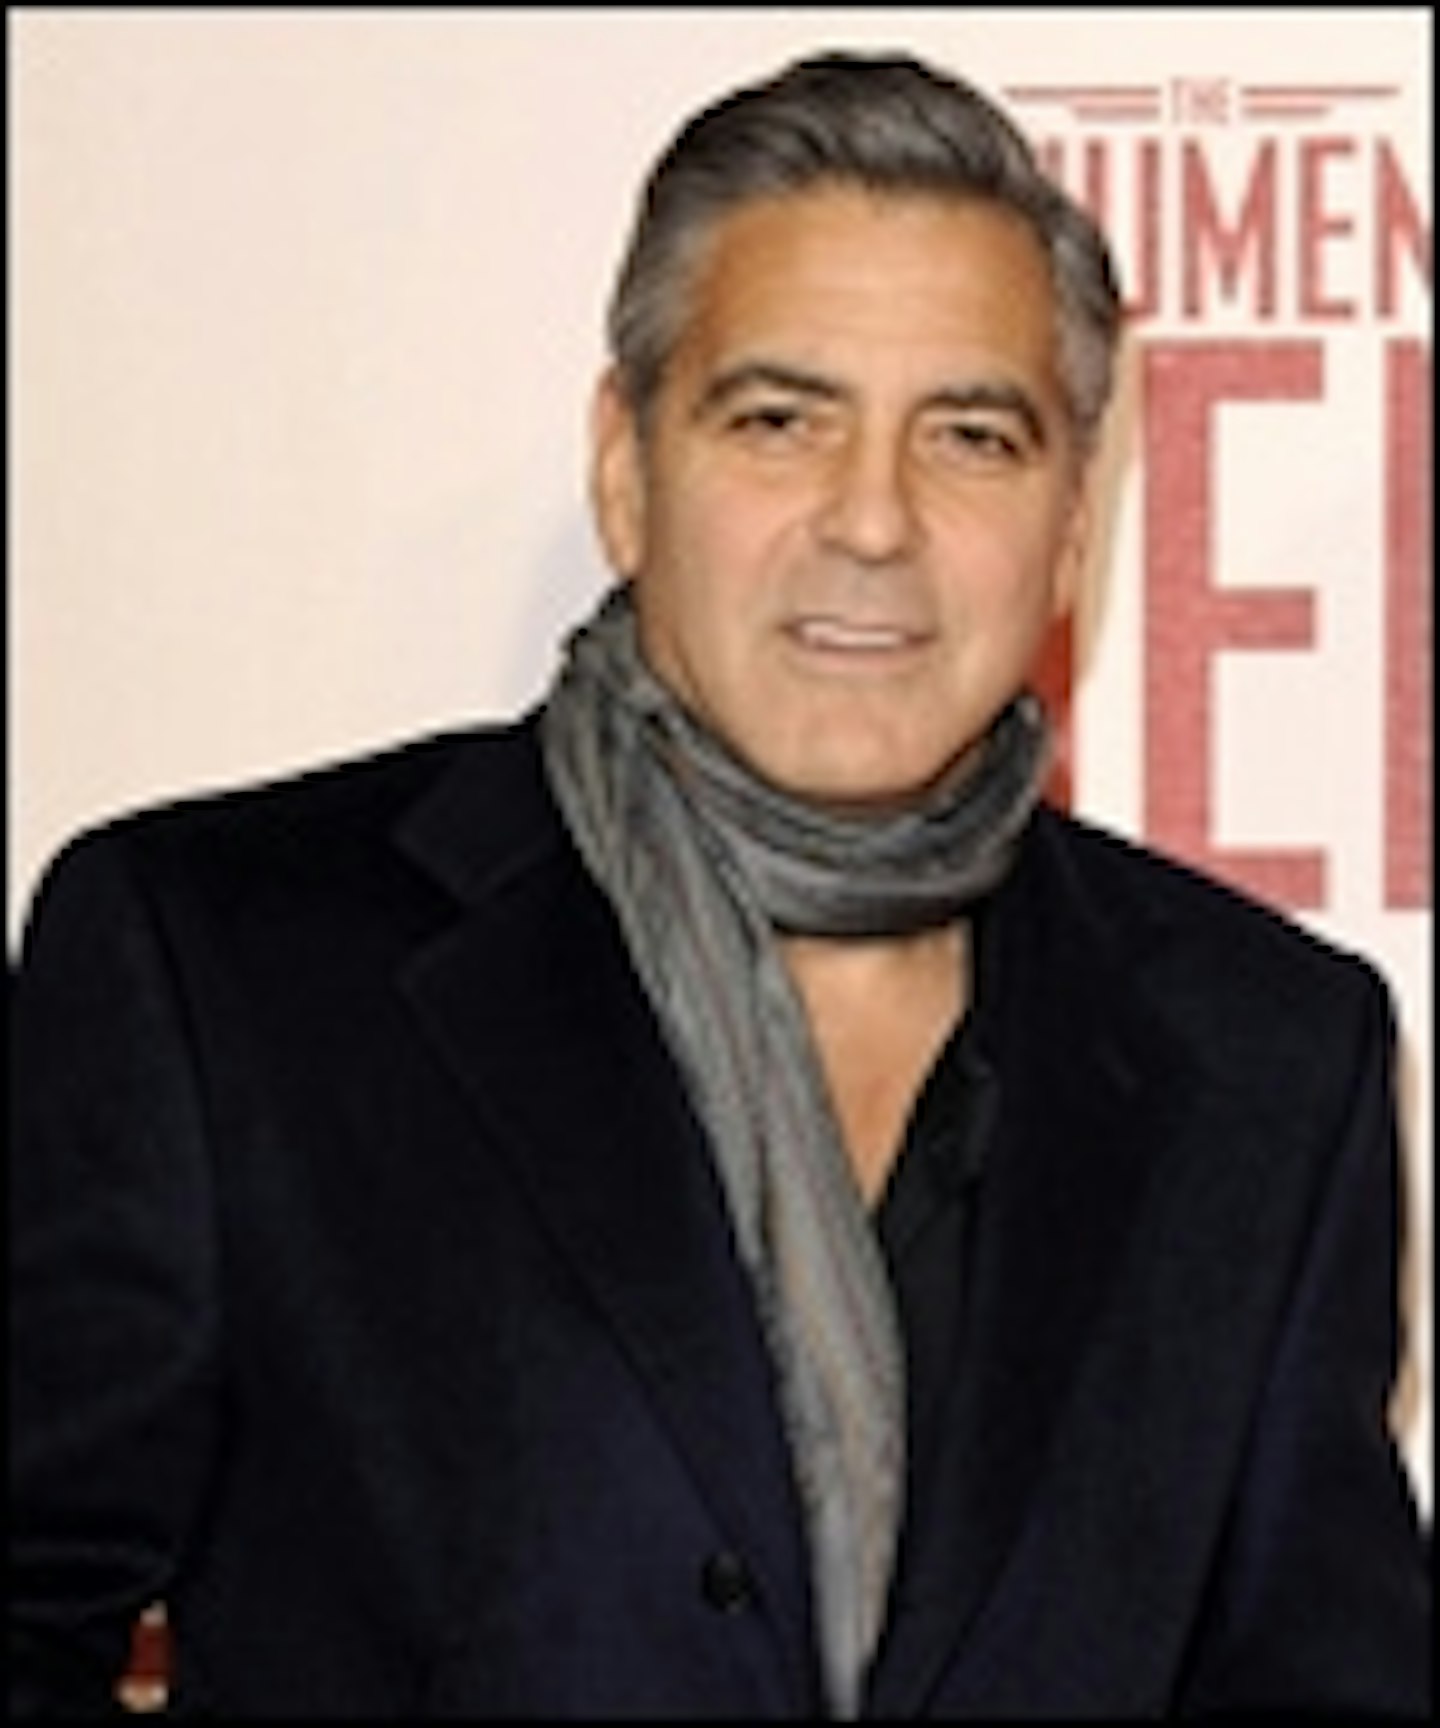 George Clooney Uncovers Hack Attack